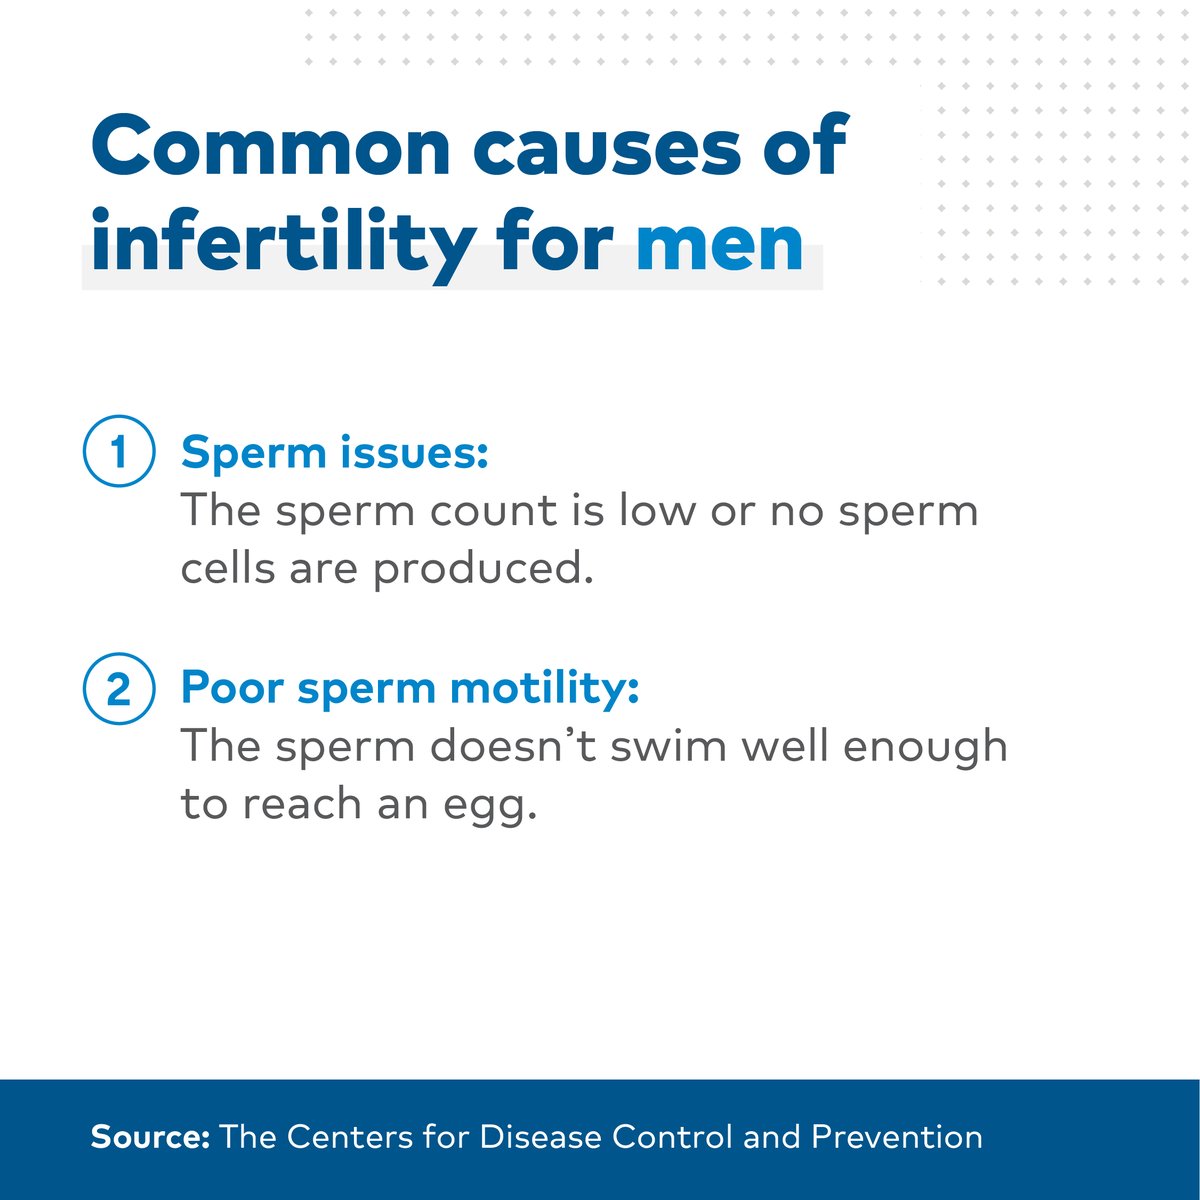 If you're struggling to get pregnant, it’s normal to wonder about #infertility. Take a look at what may be affecting your ability to conceive. Interested in learning more about fertility treatment options? Talk to your doctor and visit: bit.ly/3vmHive #HealthierTomorrows